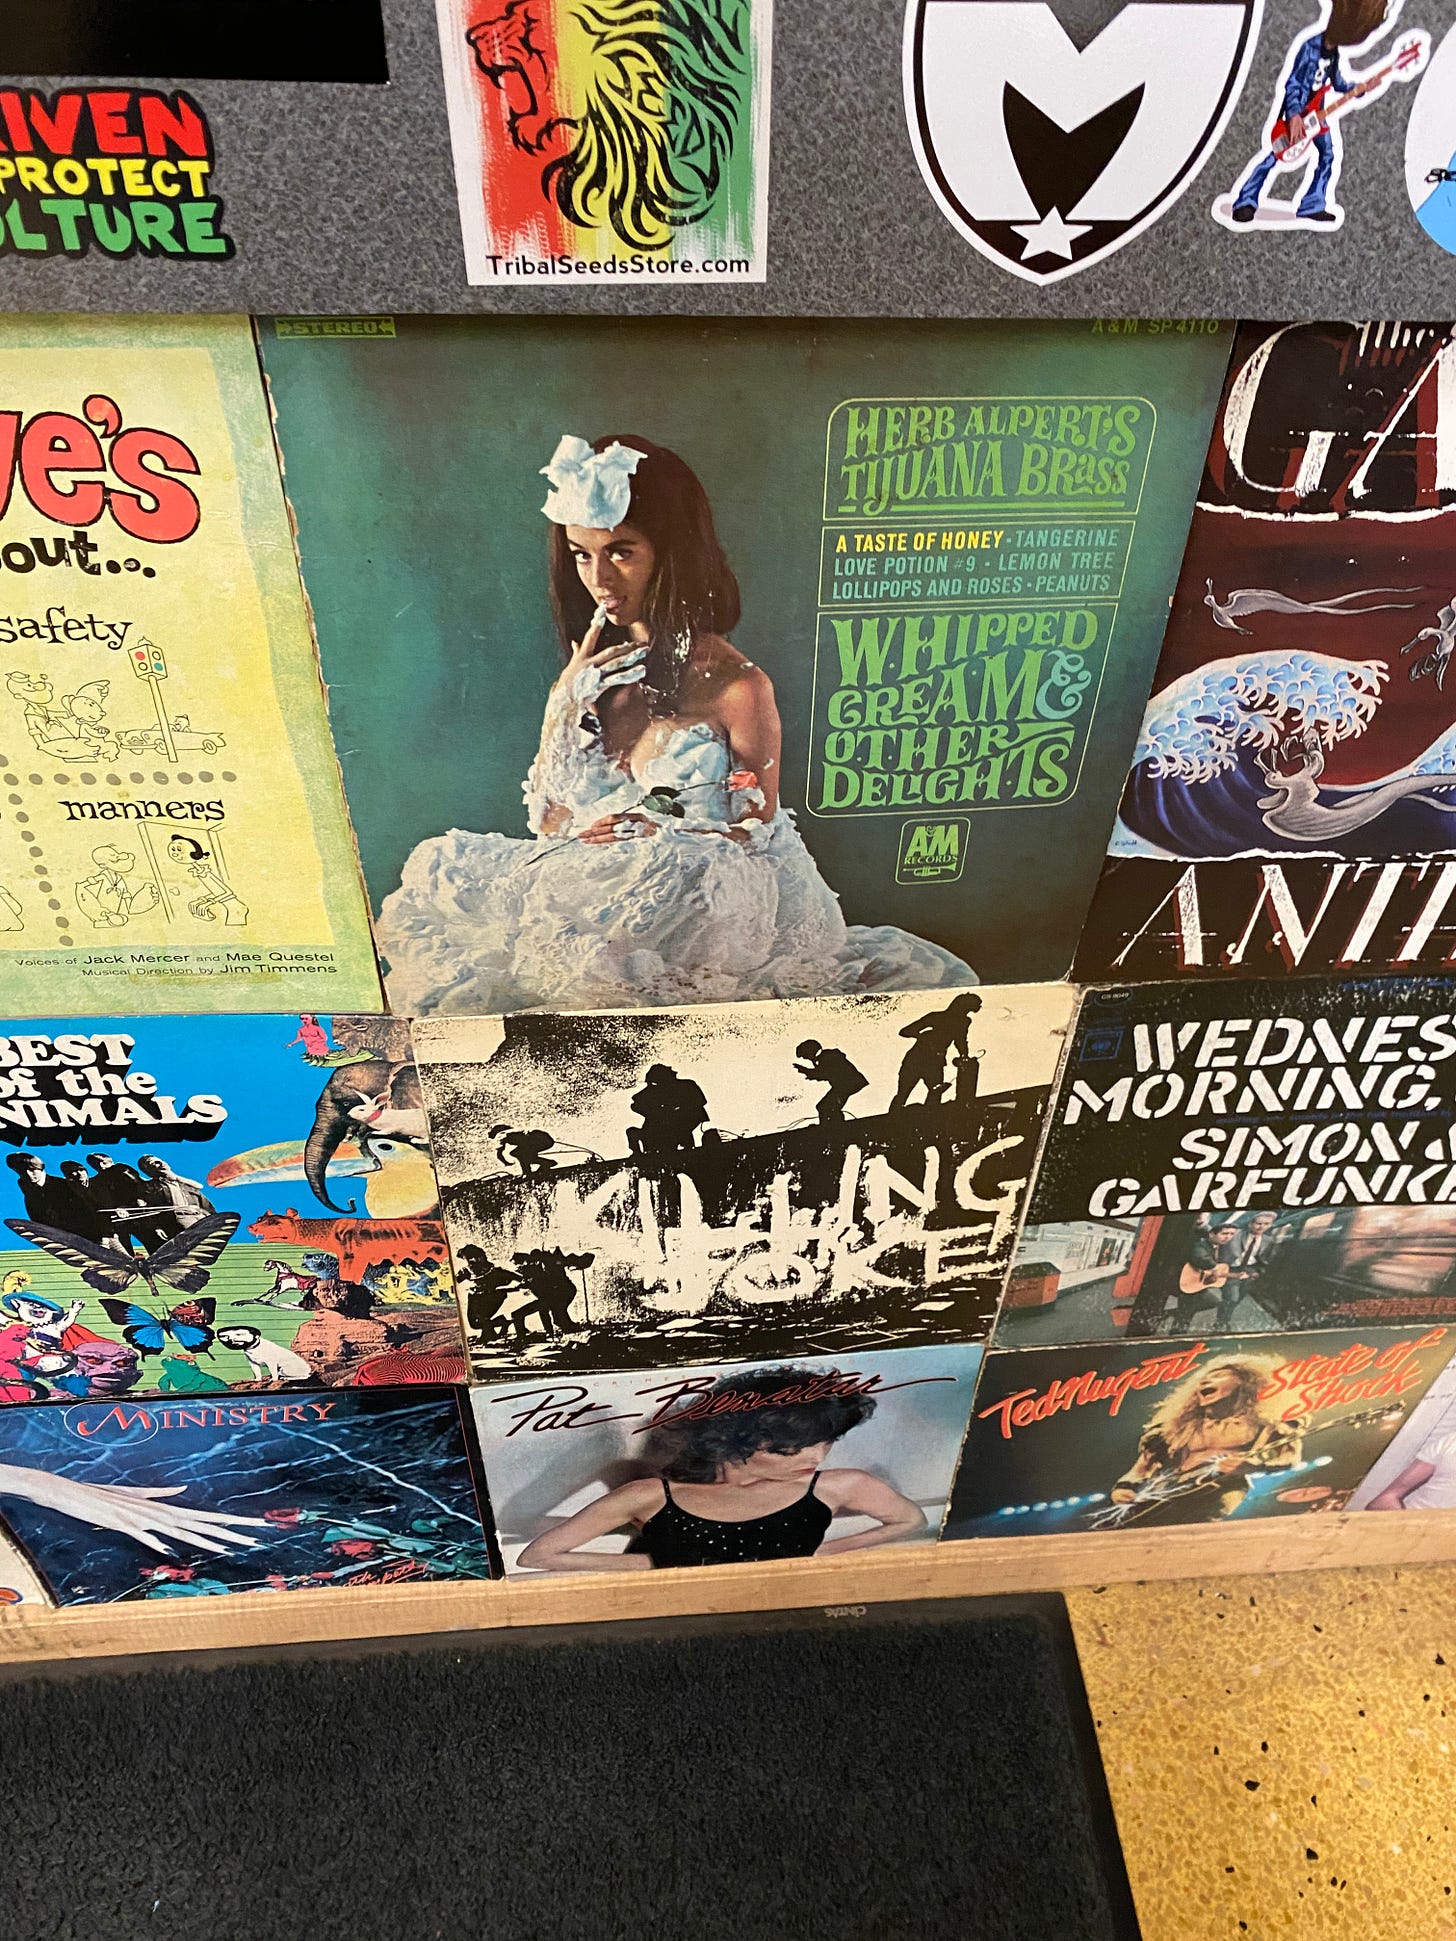 A colorful distplay of music stickers and the covers of old vinyl albums 